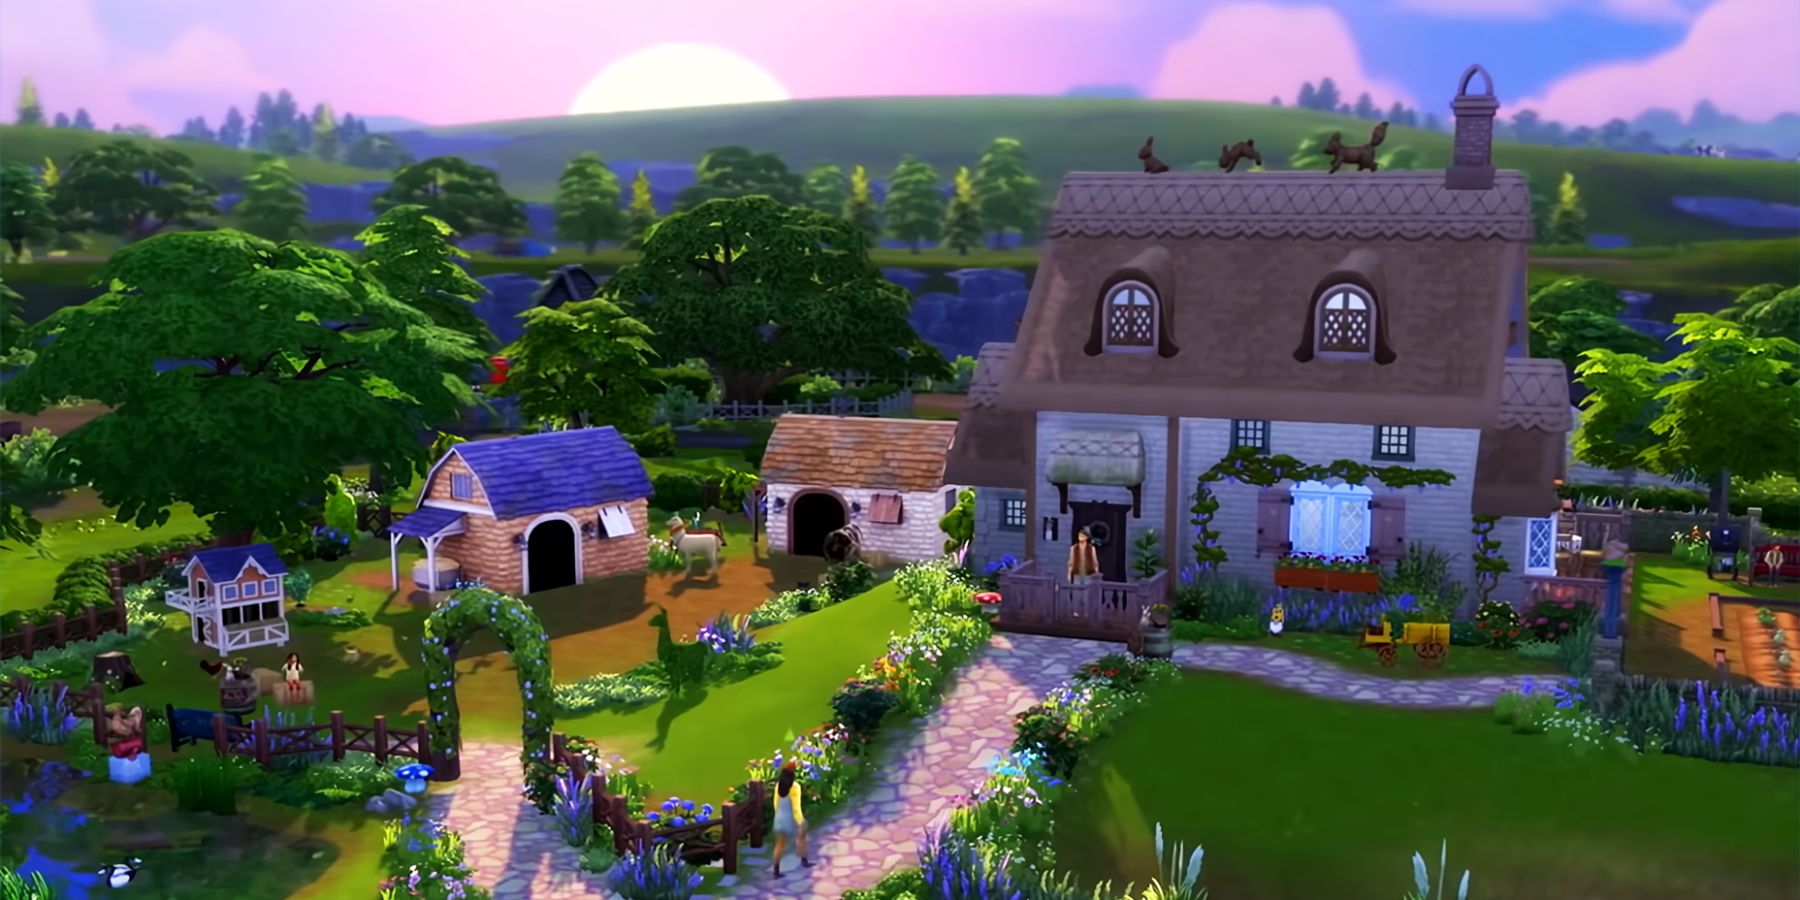 A cottage home within The Sims 4.